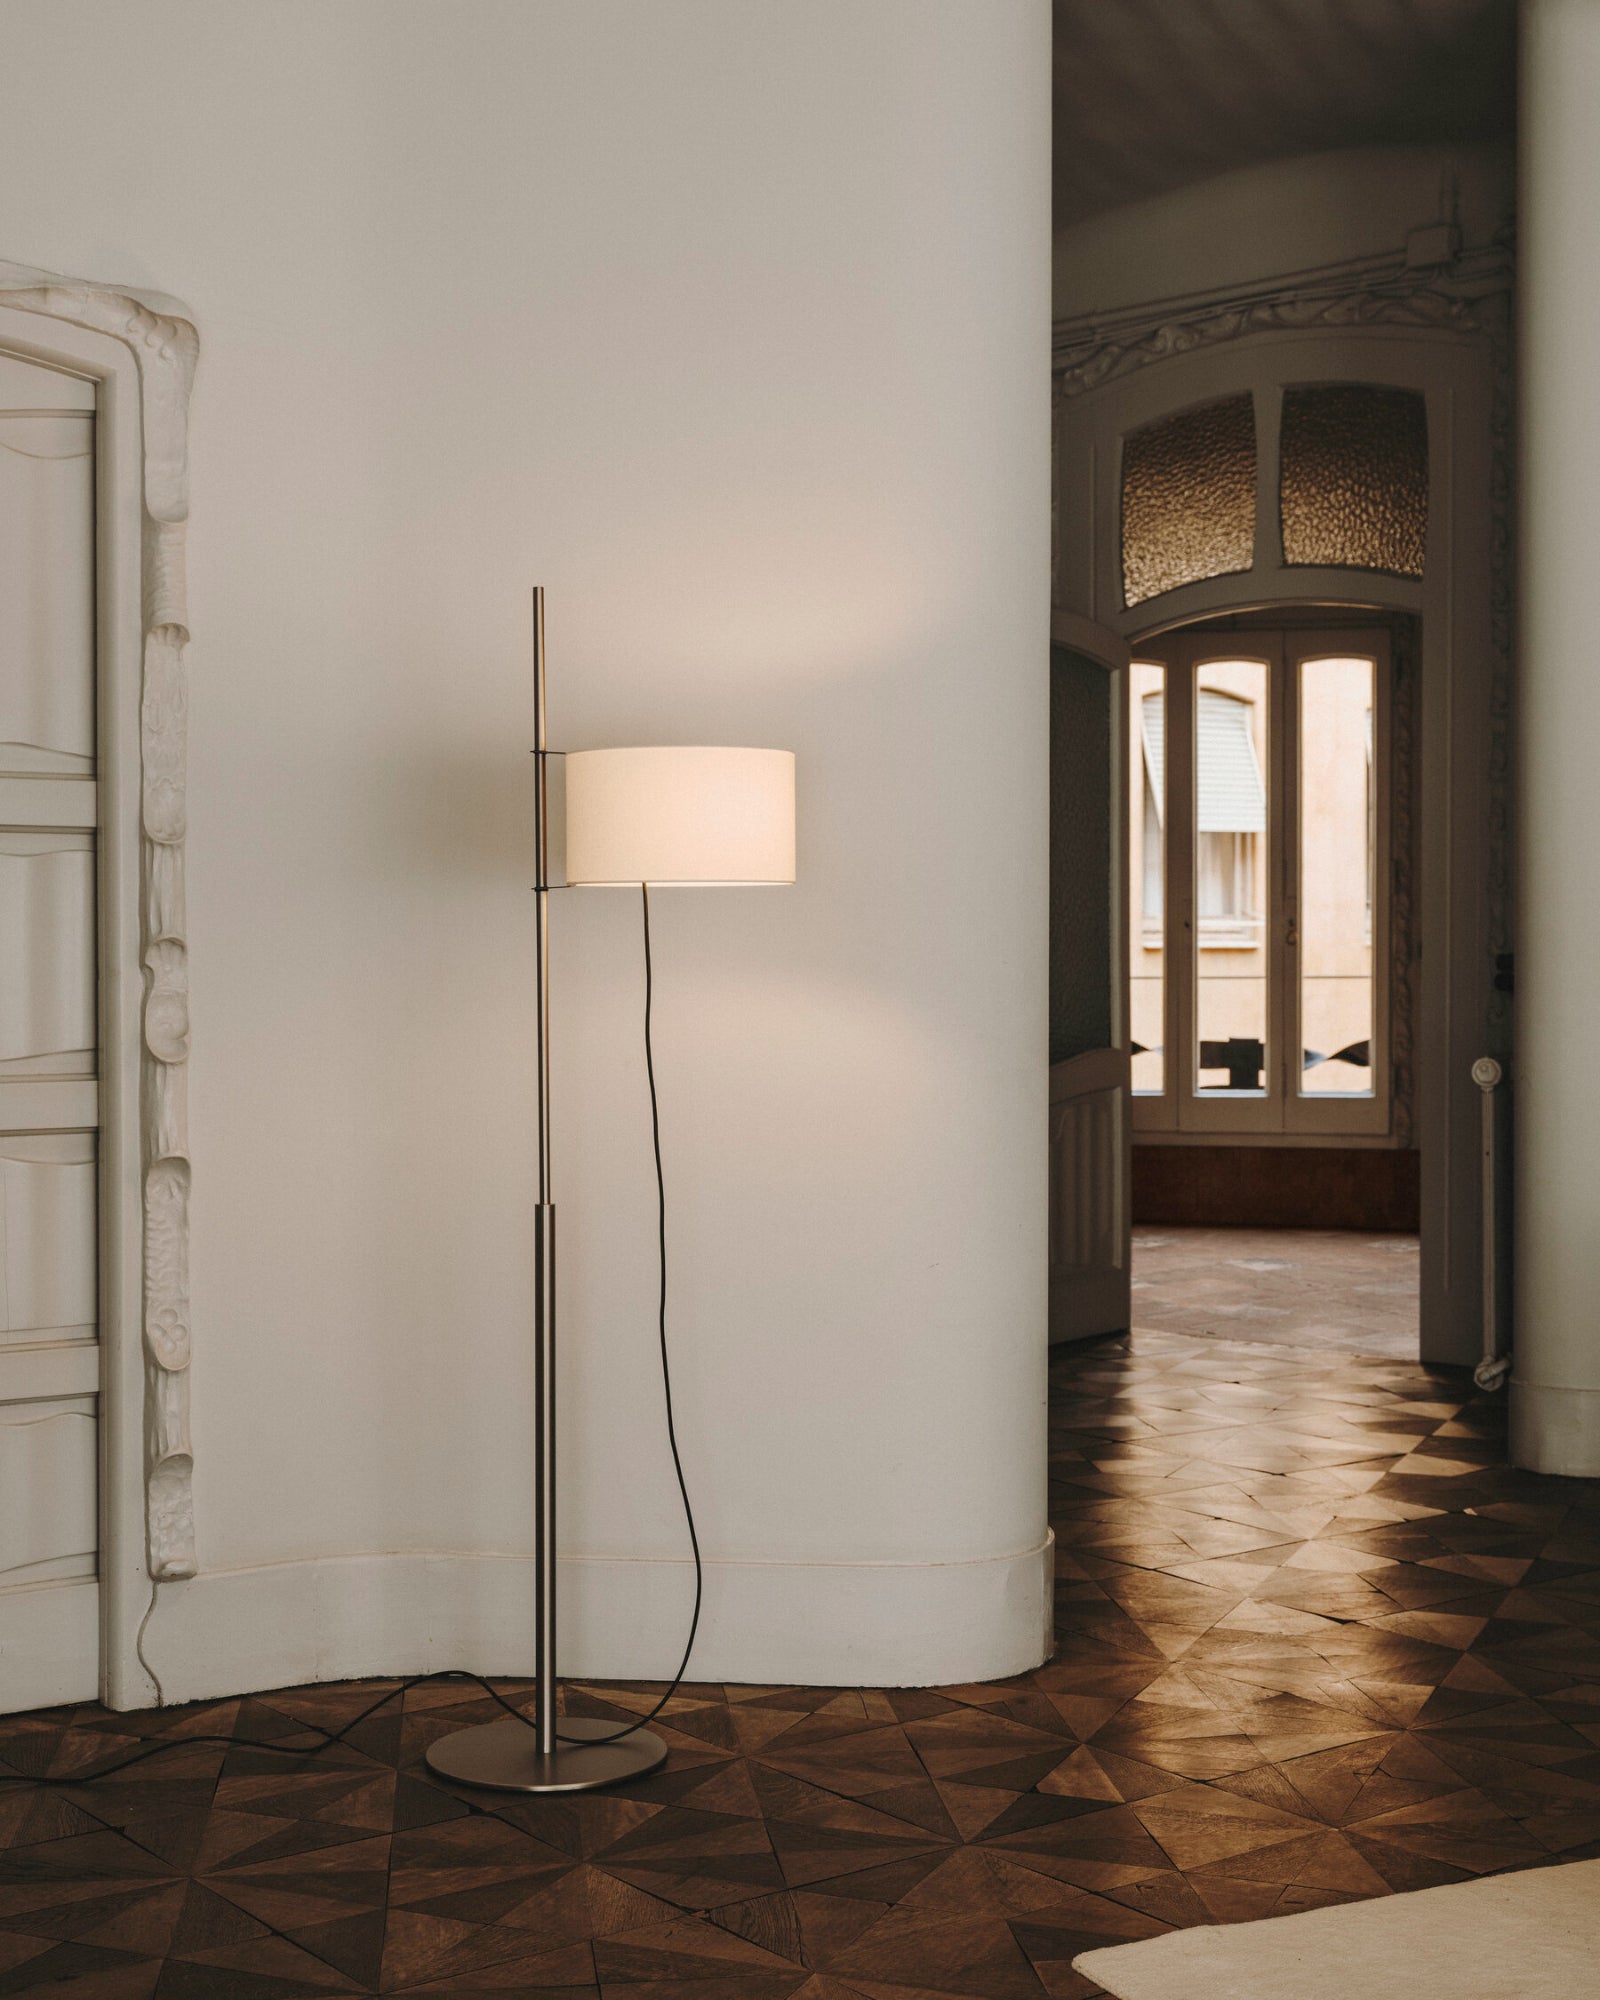 Shop TMD Floor Lamp by Santa & Cole at Nook Collections